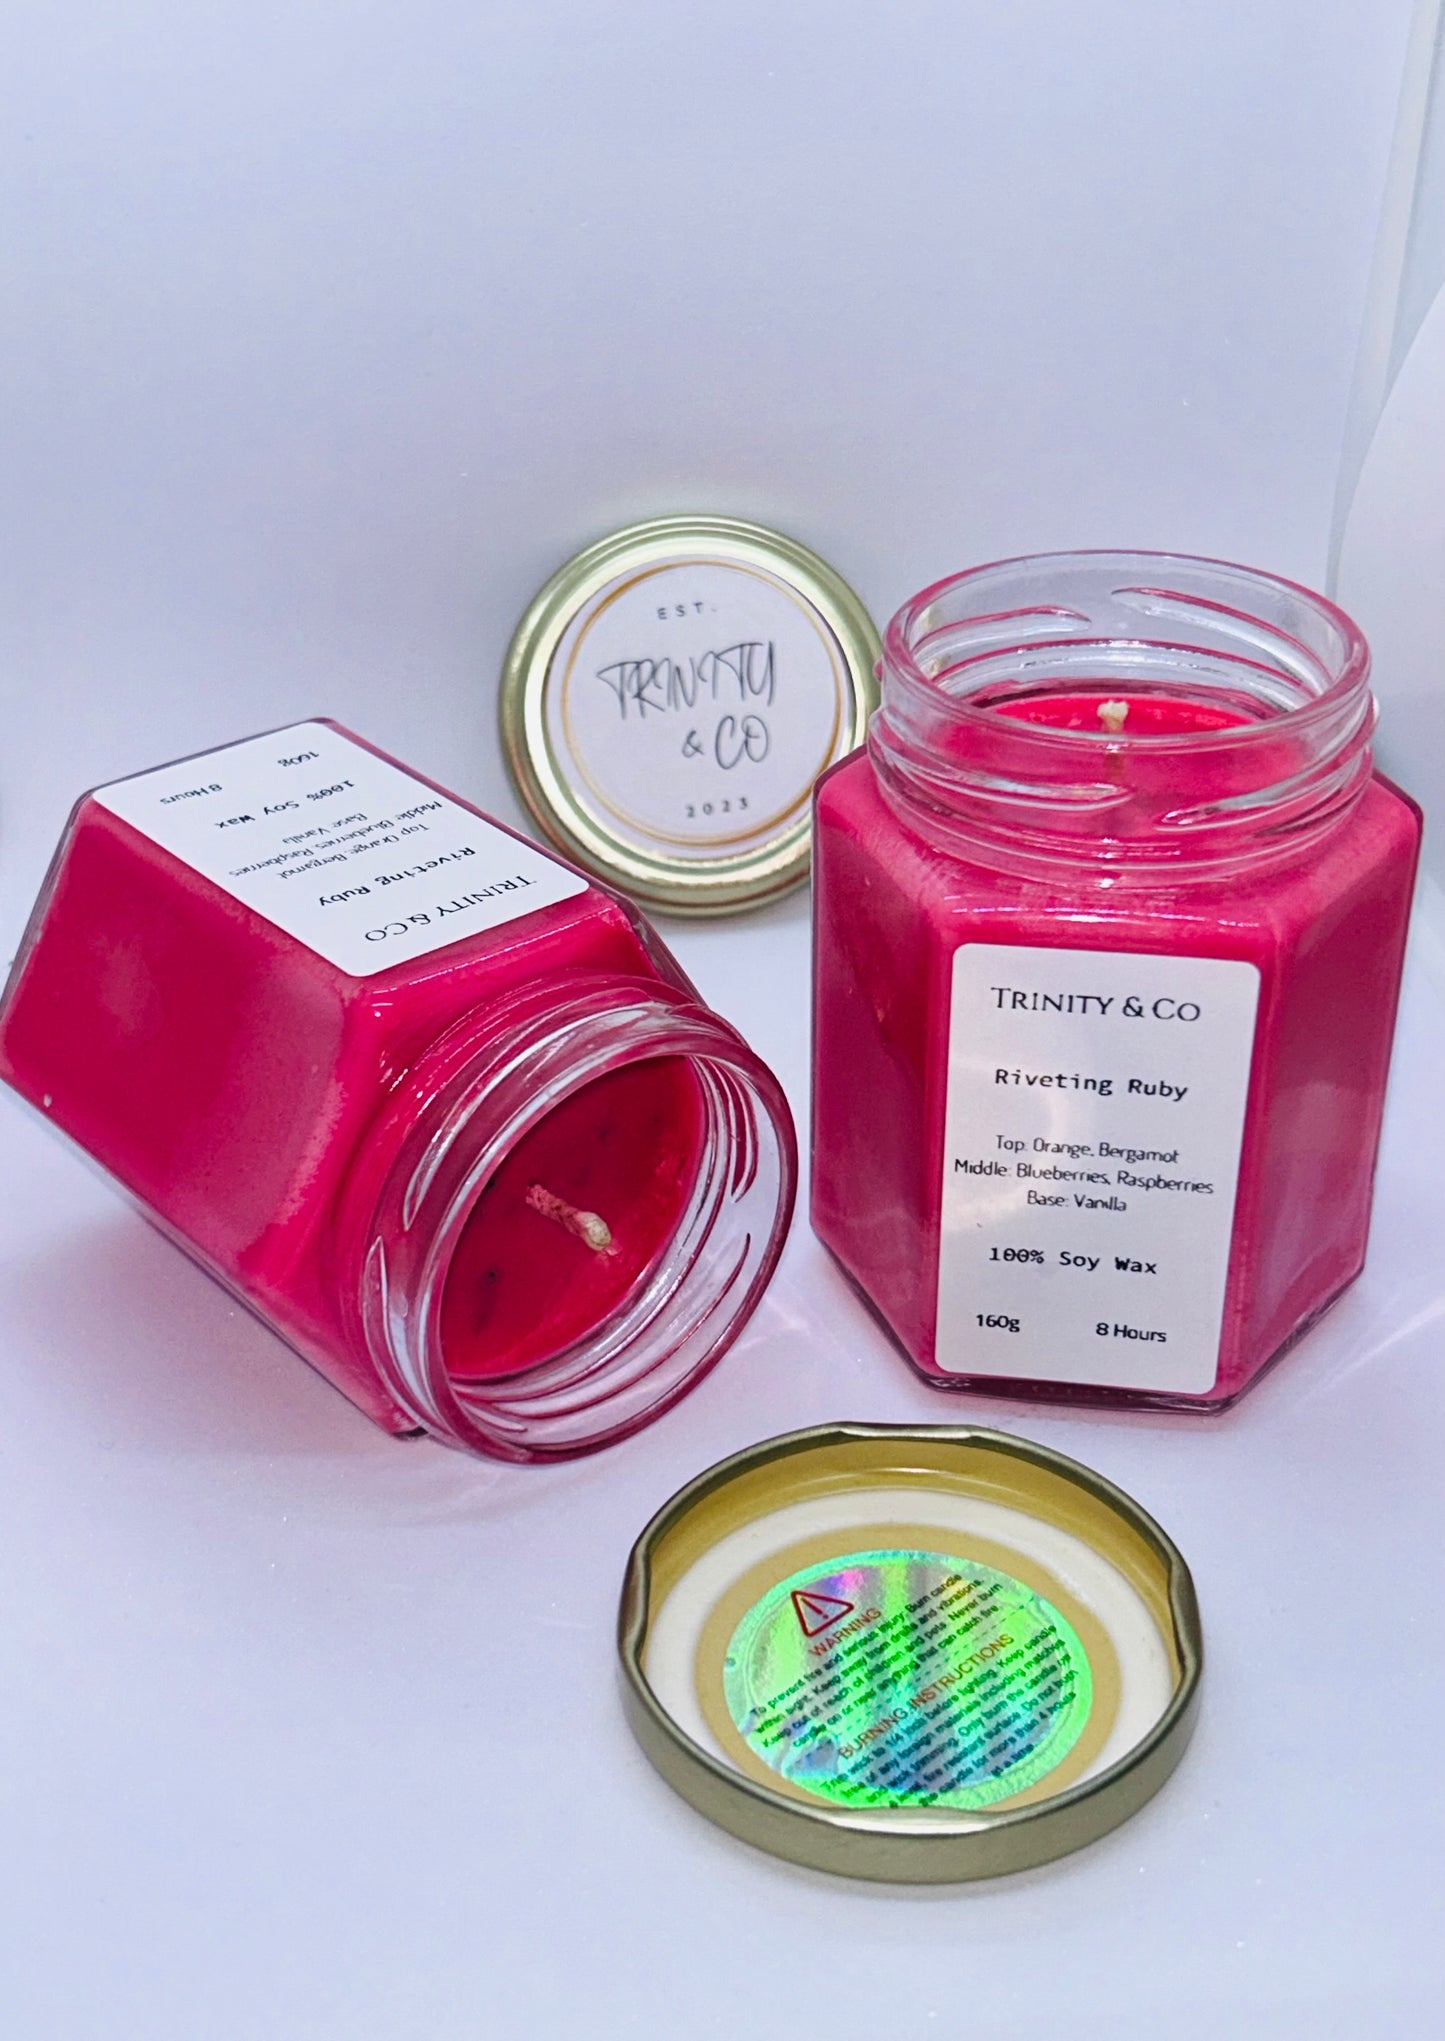 Riveting Ruby Candle